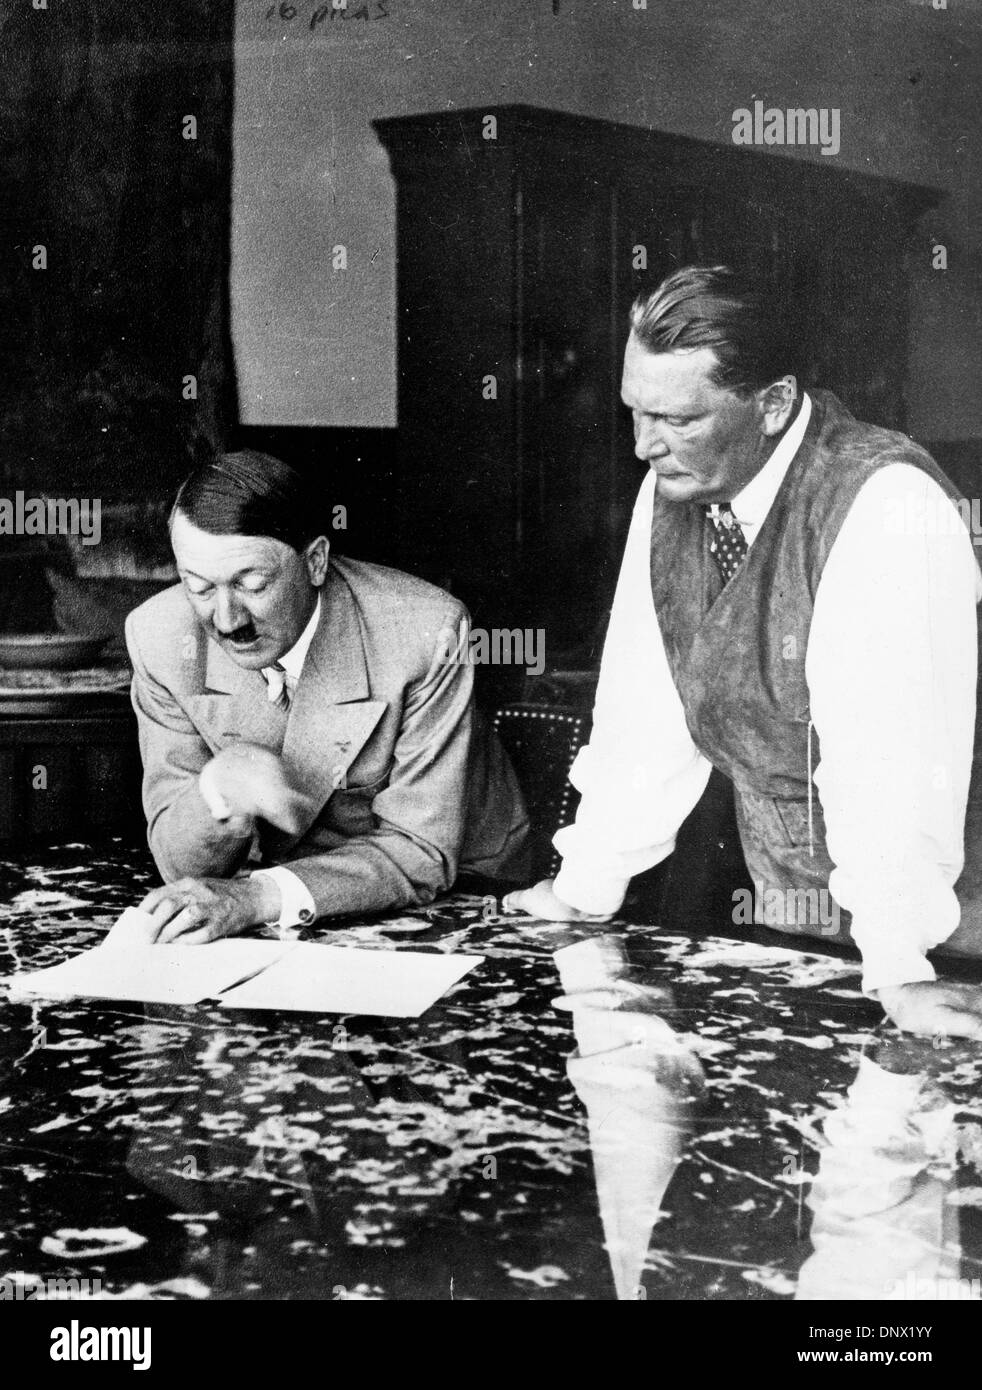 June 15, 1937 - Berlin, Germany - ADOLF HITLER and HERMANN GOERING, founder of the Gestapo. Adolf Hitler (April 20, 1889ÐApril 30, 1945) was the Fuhrer und Reichskanzler (Leader and Imperial chancellor) of Germany from 1933 to his death. He was leader of the National Socialist German Workers Party (NSDAP), better known as the Nazi Party. At the height of his power, the armies of Na Stock Photo